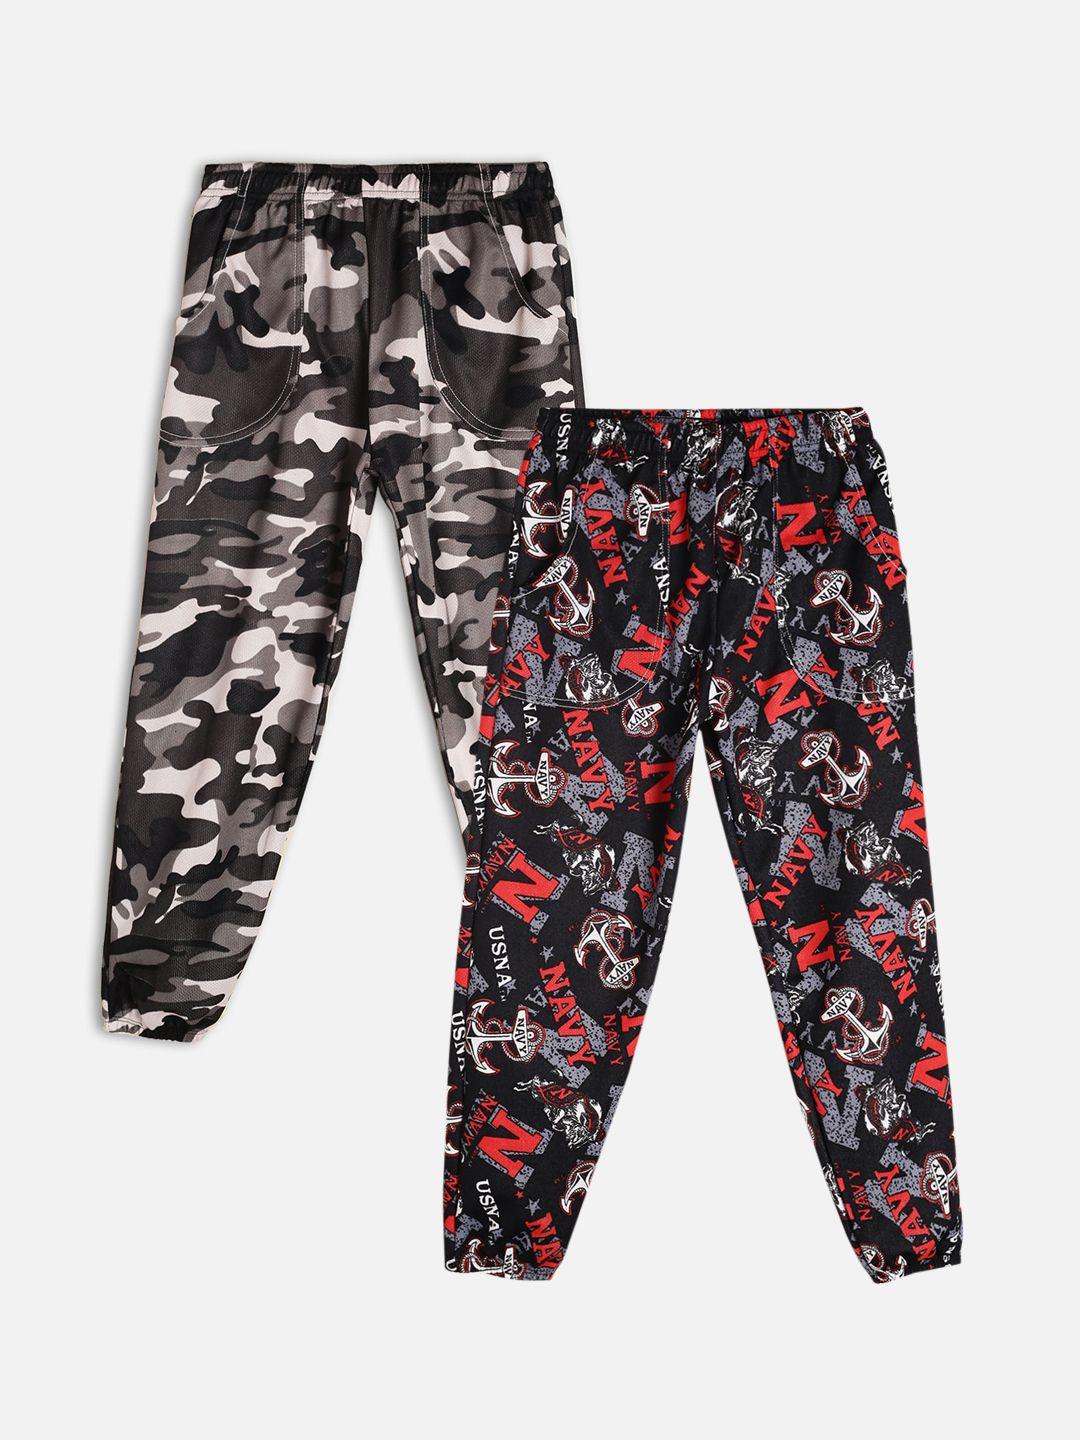 fashionable boys pack of 2 printed mid-rise lounge pants